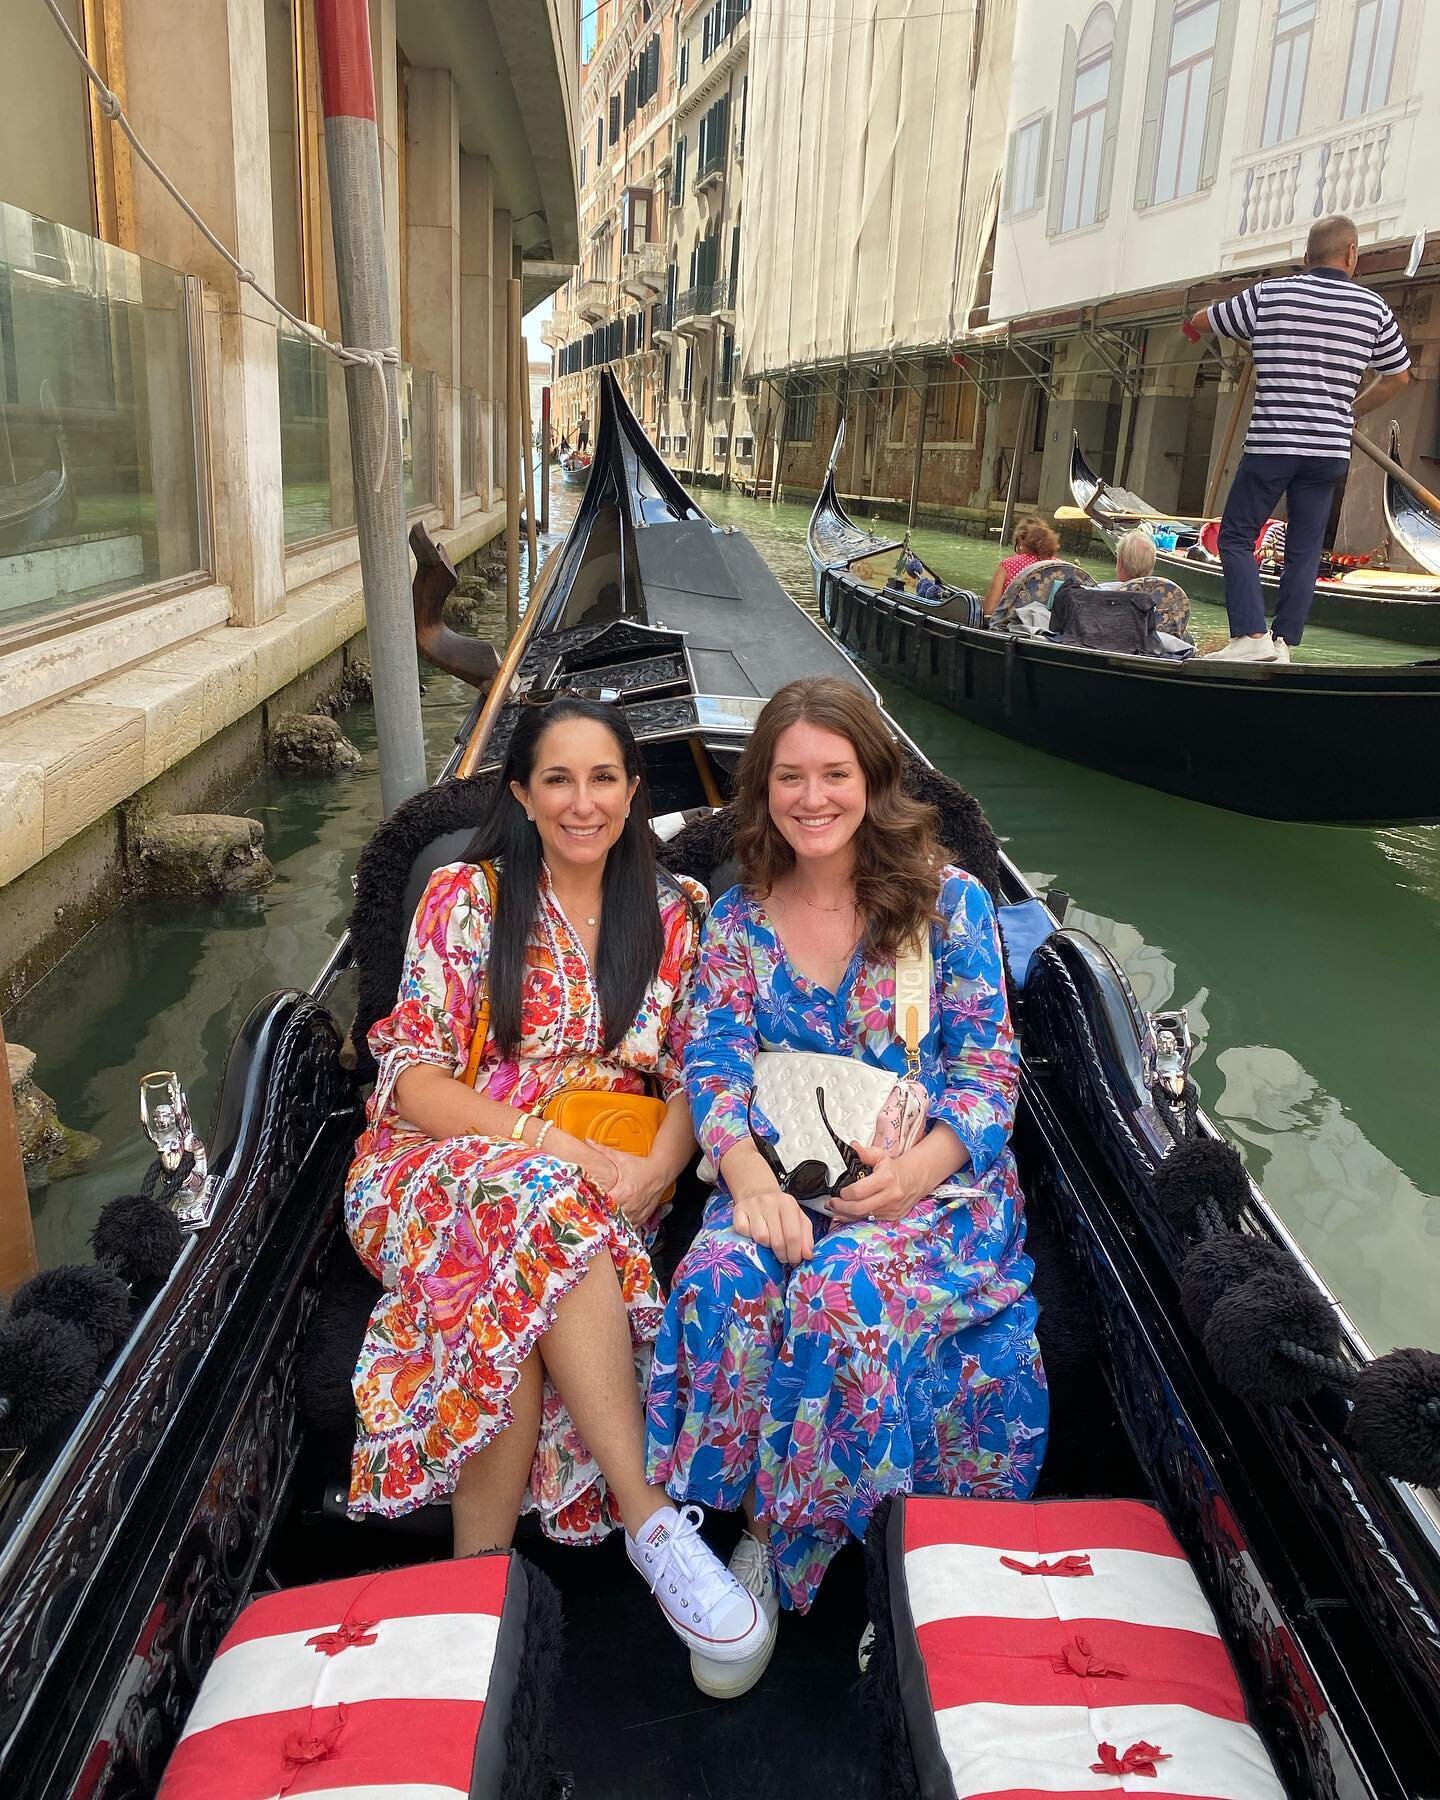 Venice and Istanbul with great hair! (Bonus - traveling with a friend meant one of us carried a straightener and the other an instawave!) 

If you use a straightener or curling iron daily at home, we have vacation options for while you&rsquo;re trave